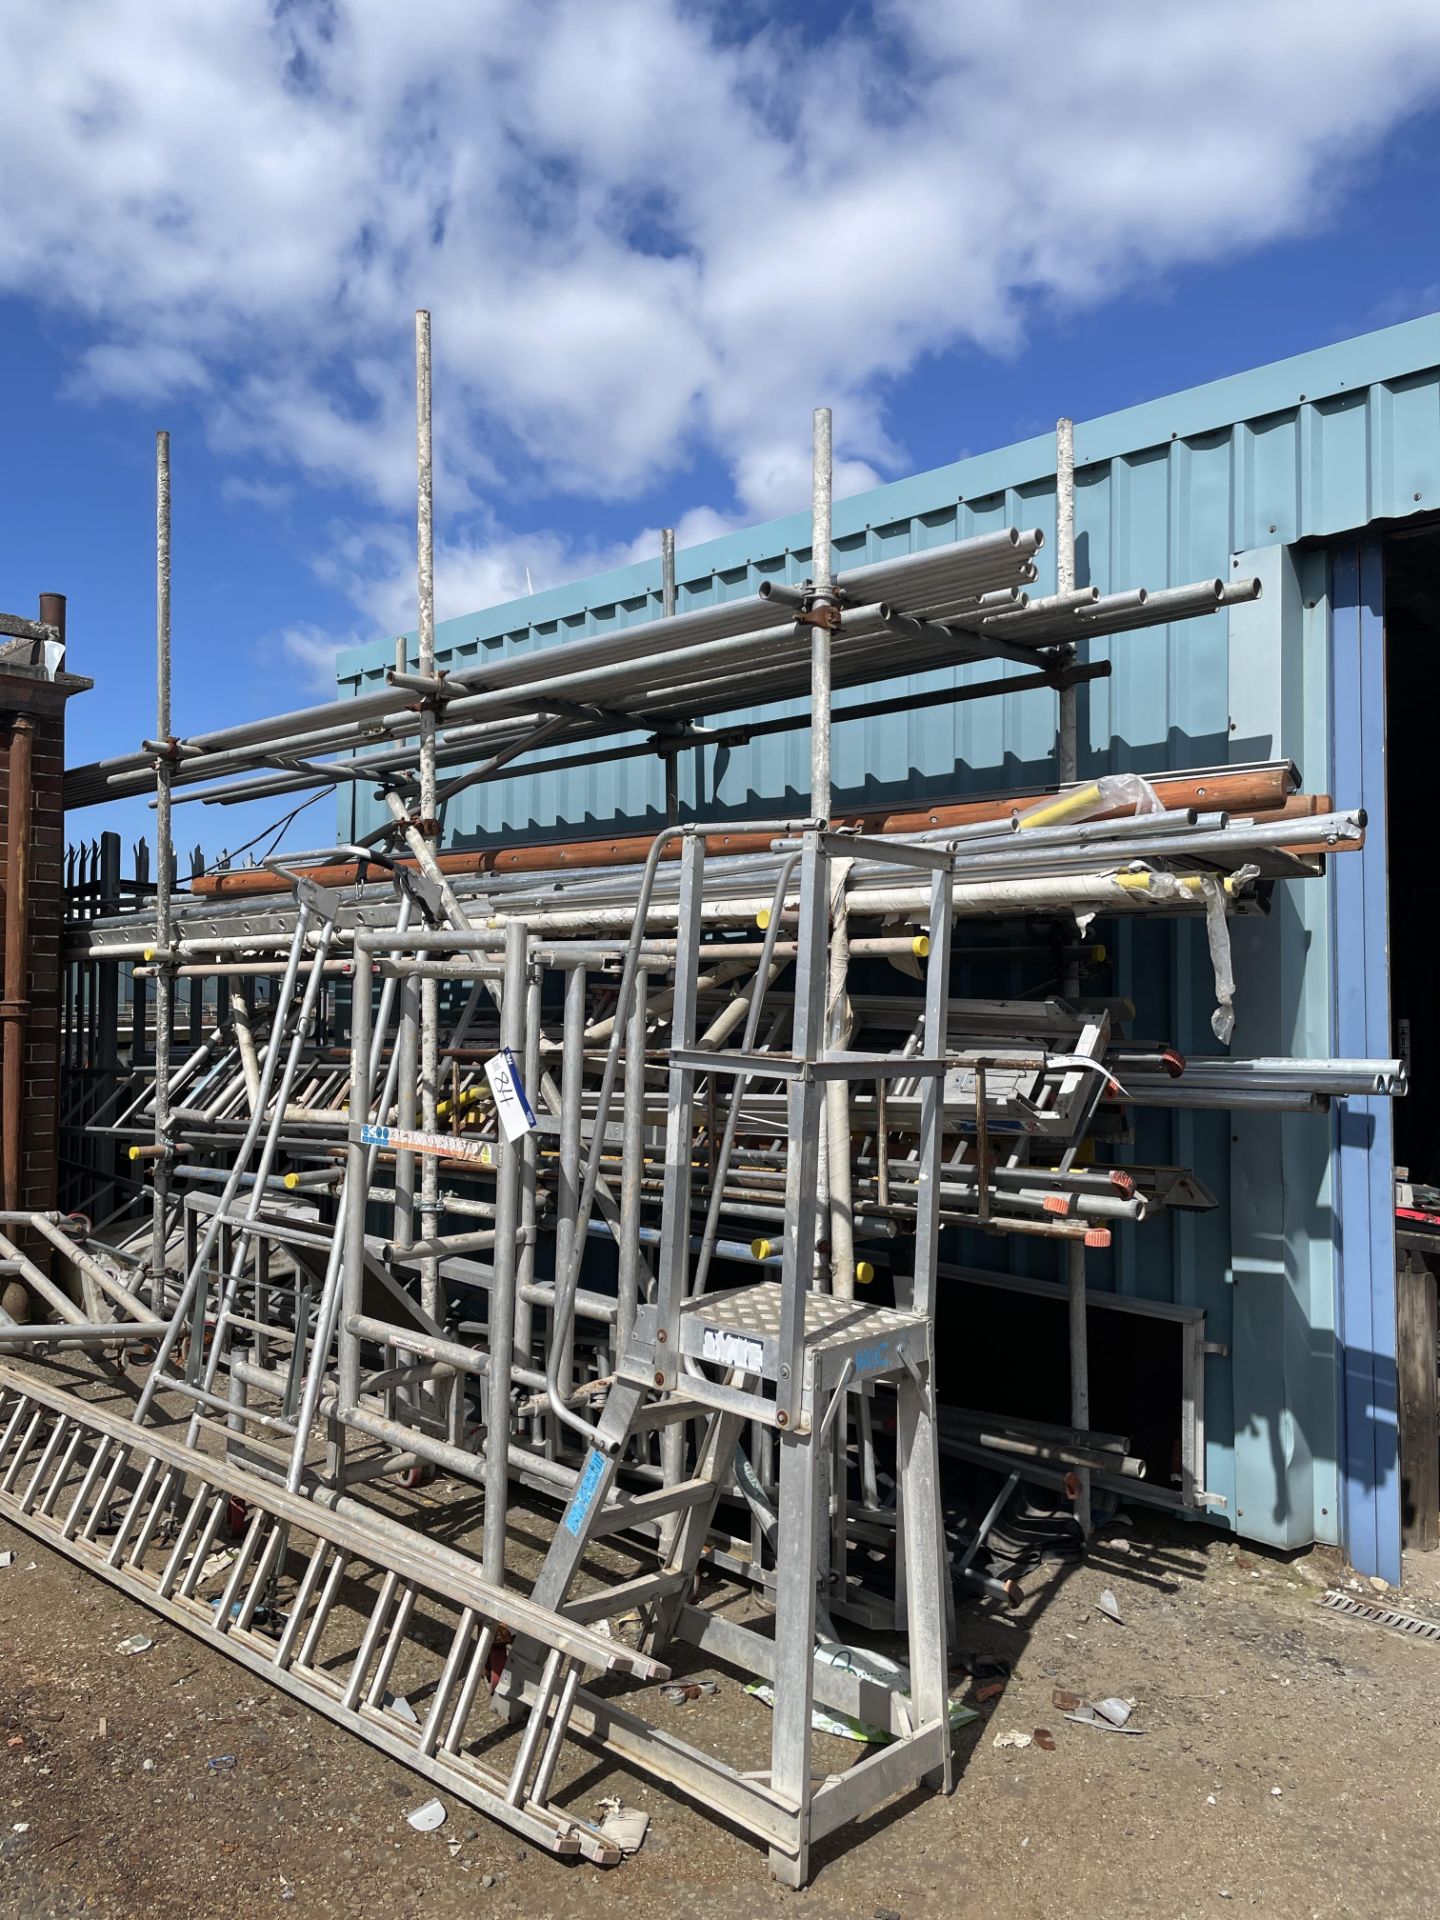 Tubular Scaffold Rack & Contents, including ladders, galvanised tubing etc. Please read the